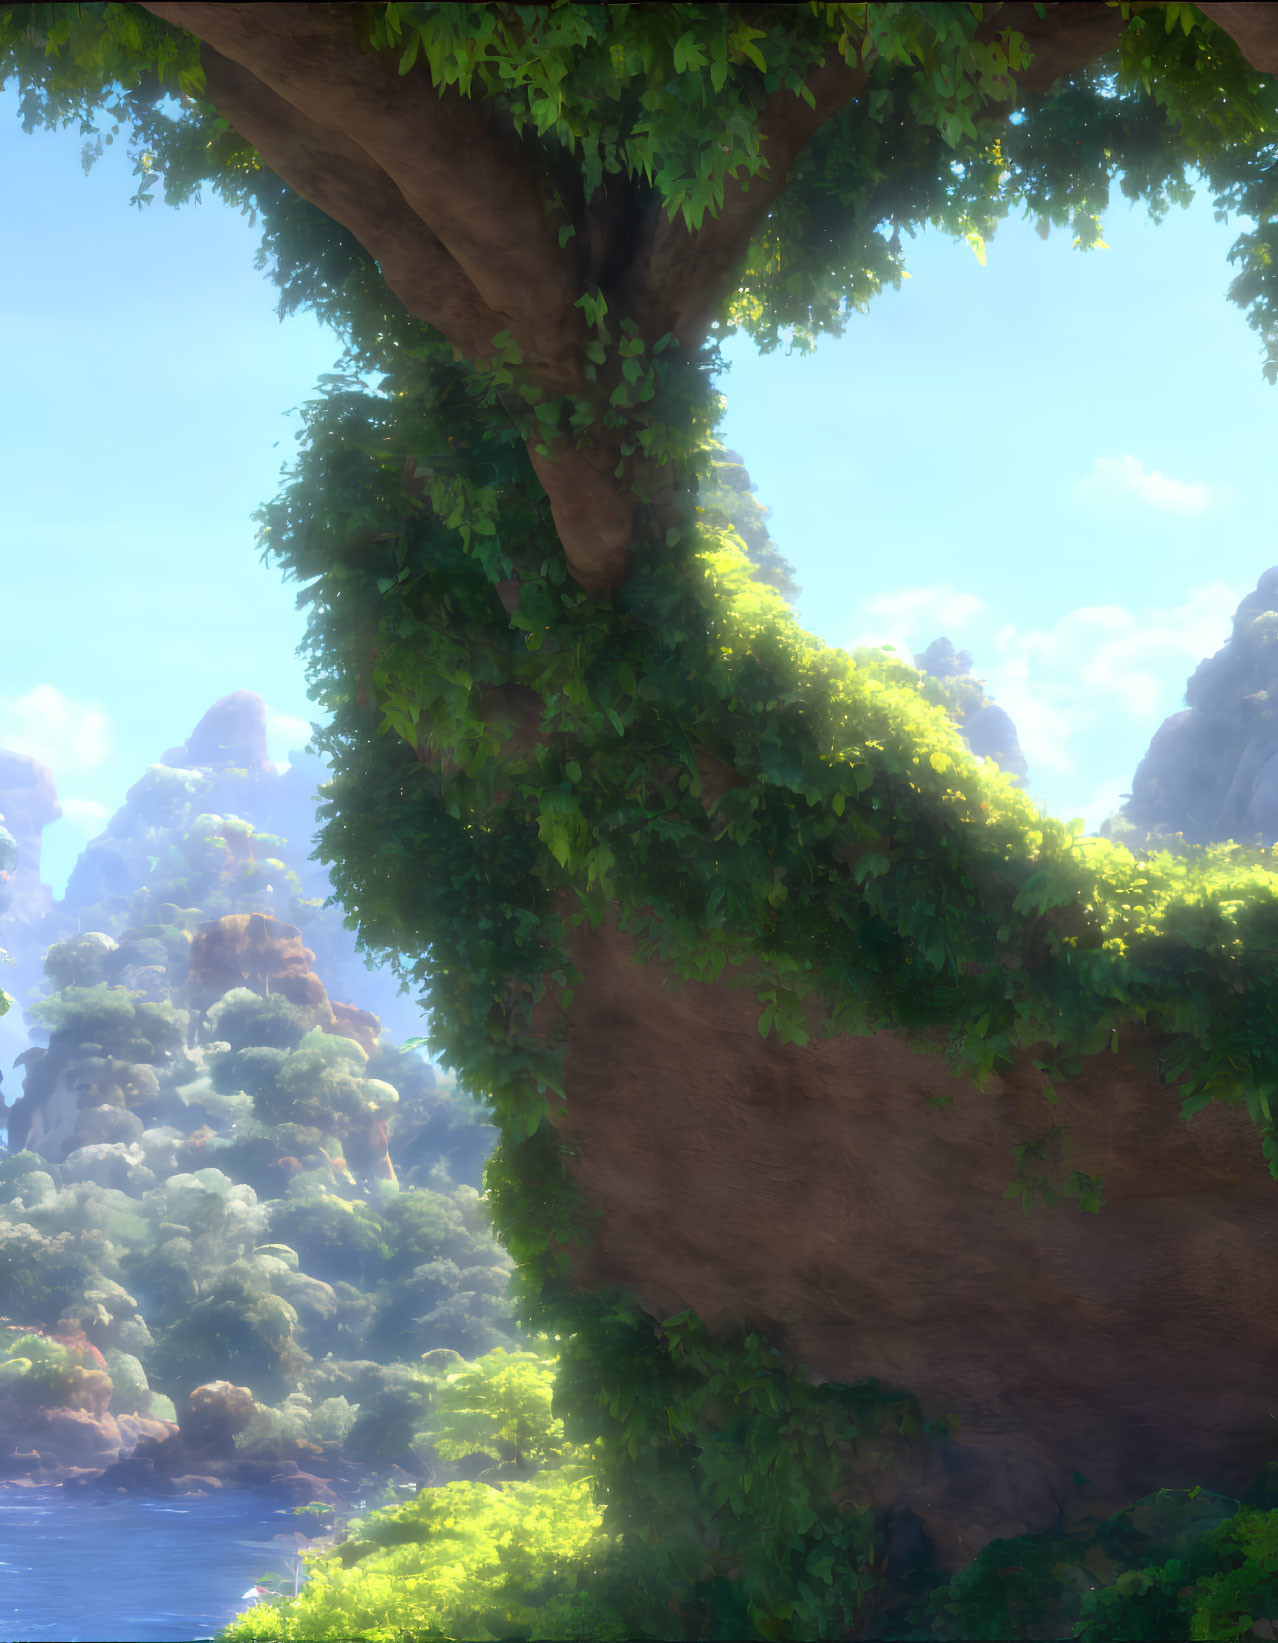 Scenic verdant cliff with lush tree and foliage above misty forest